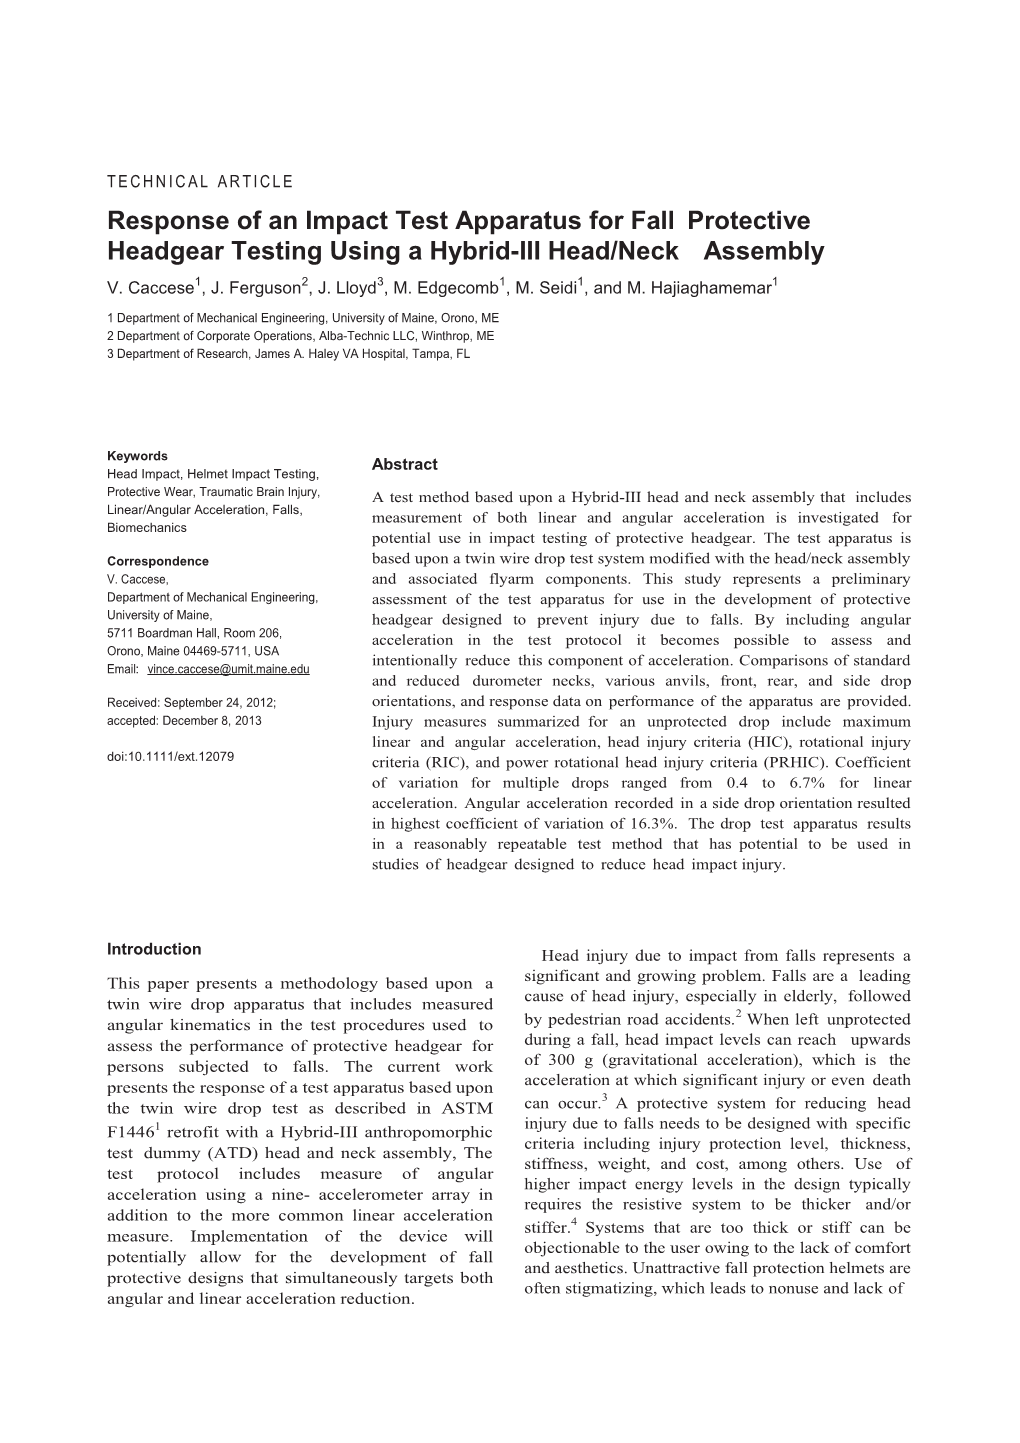 Response of an Impact Test Apparatus for Fall Protective Headgear Testing Using a Hybridiii